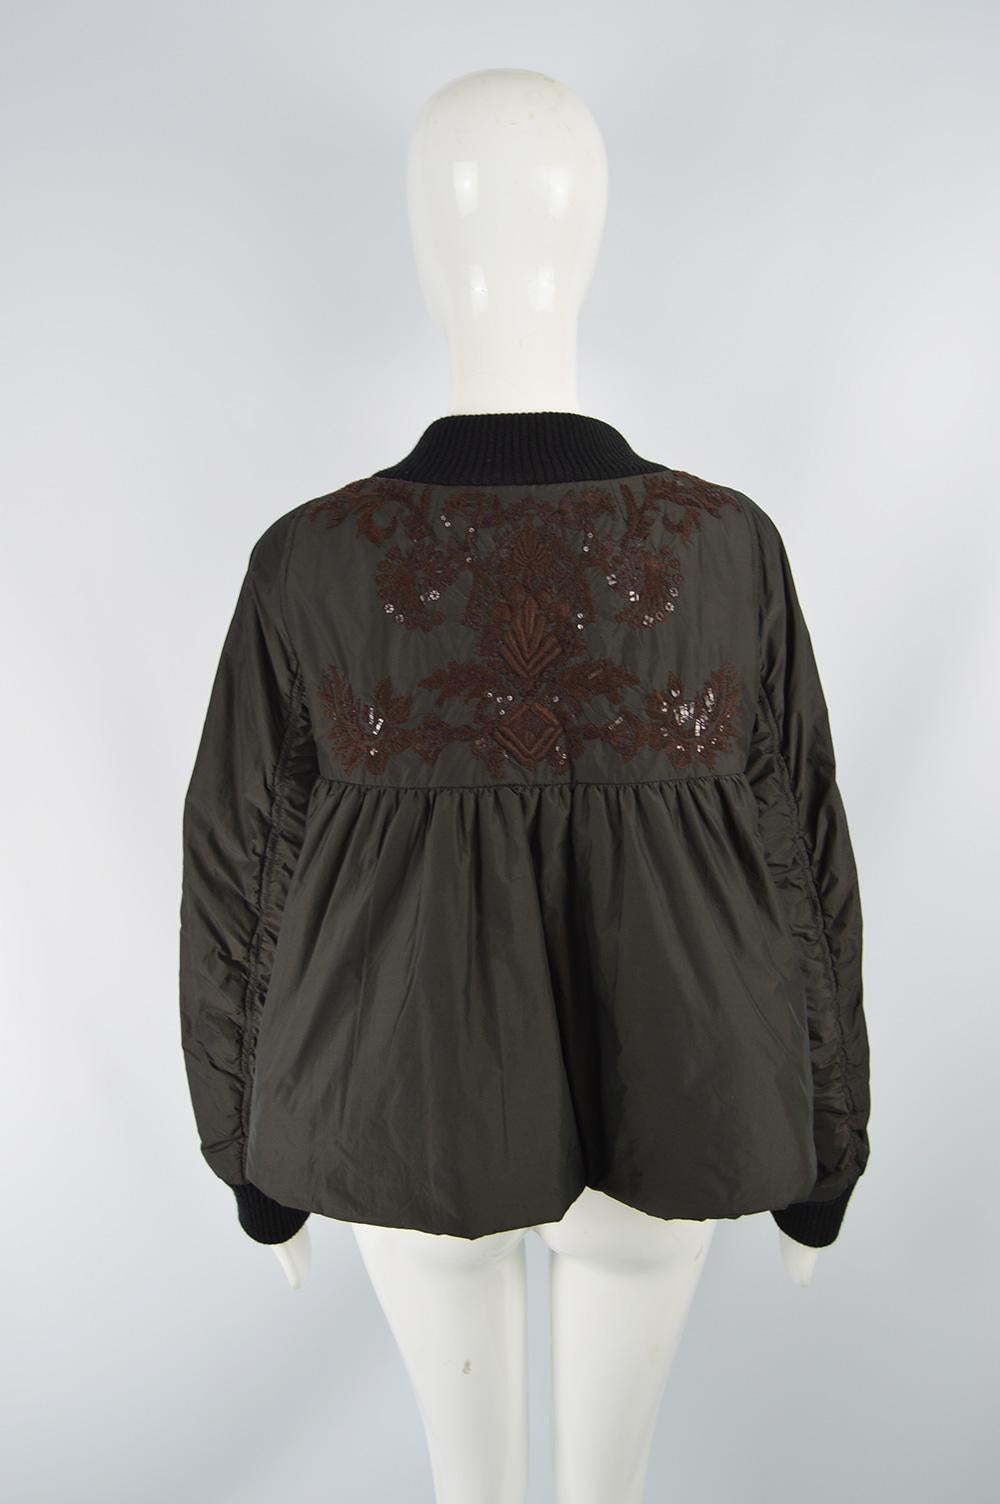 Dries Van Noten Architectural Fan Back Embroidered & Sequinned Bomber Jacket 4